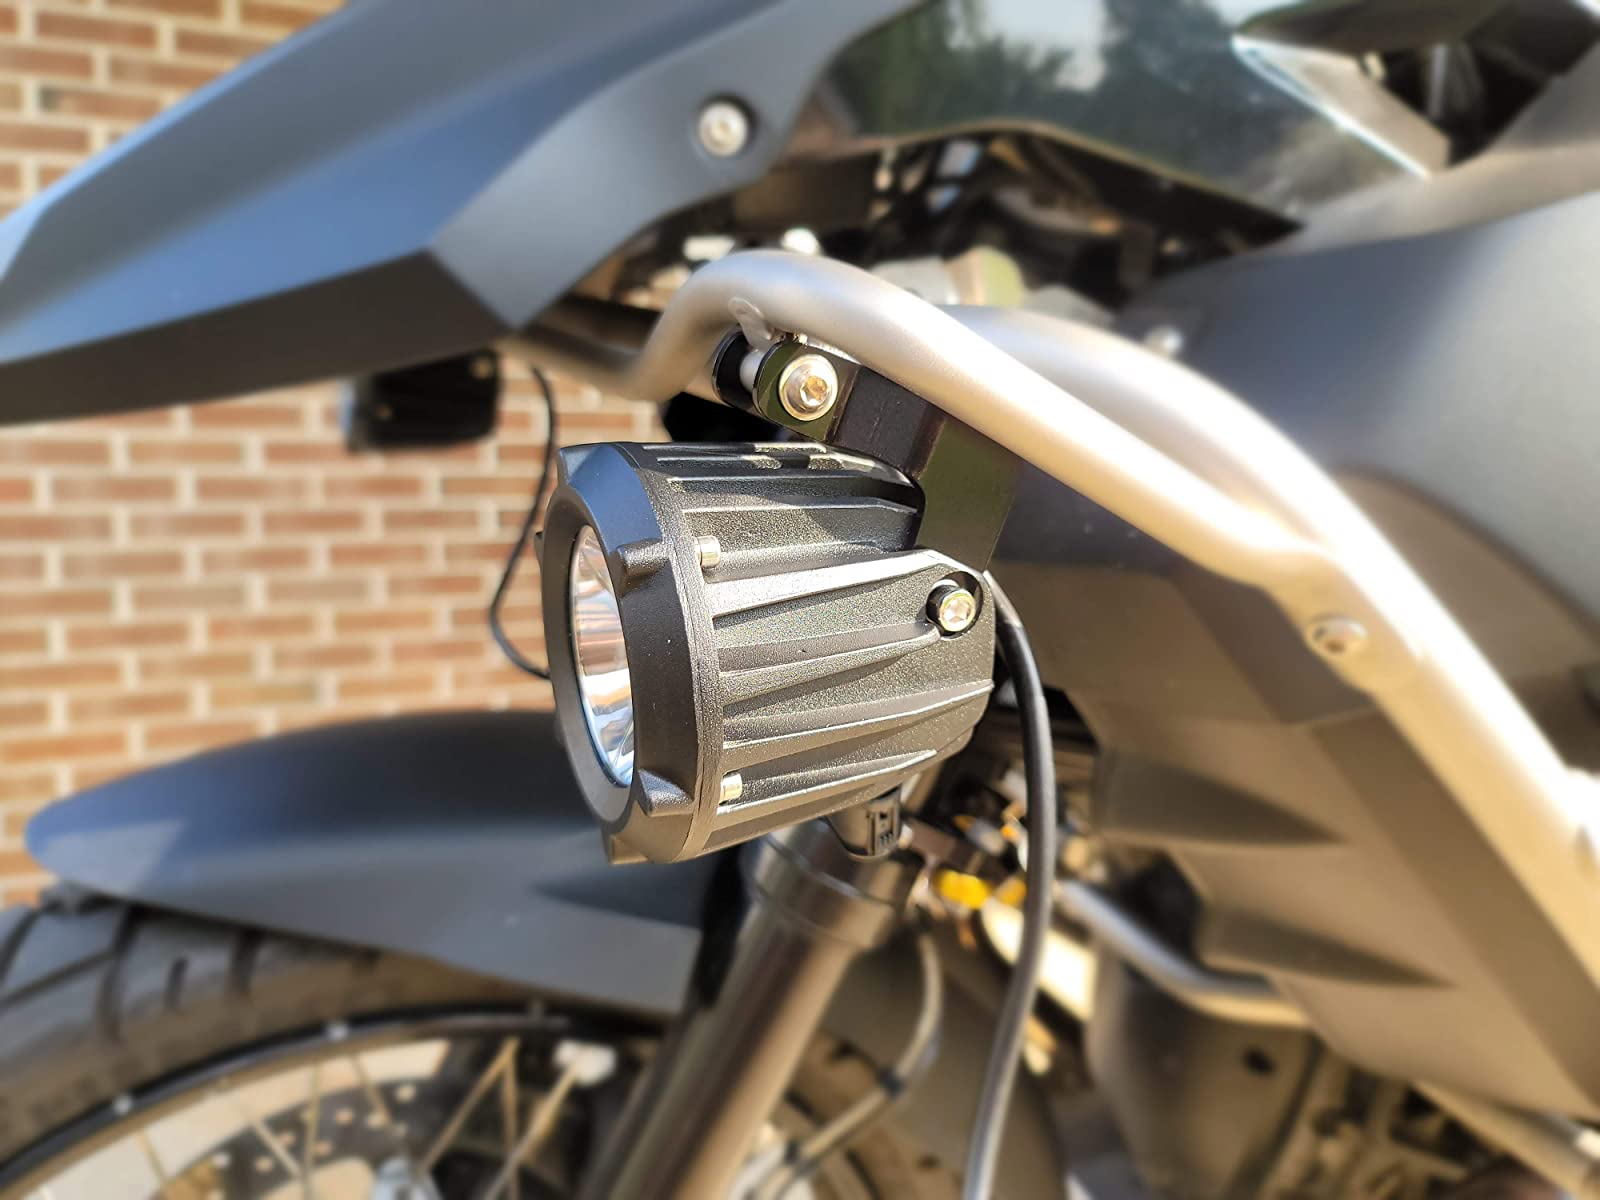 R2 Series Round Driving Light On Motorcycle